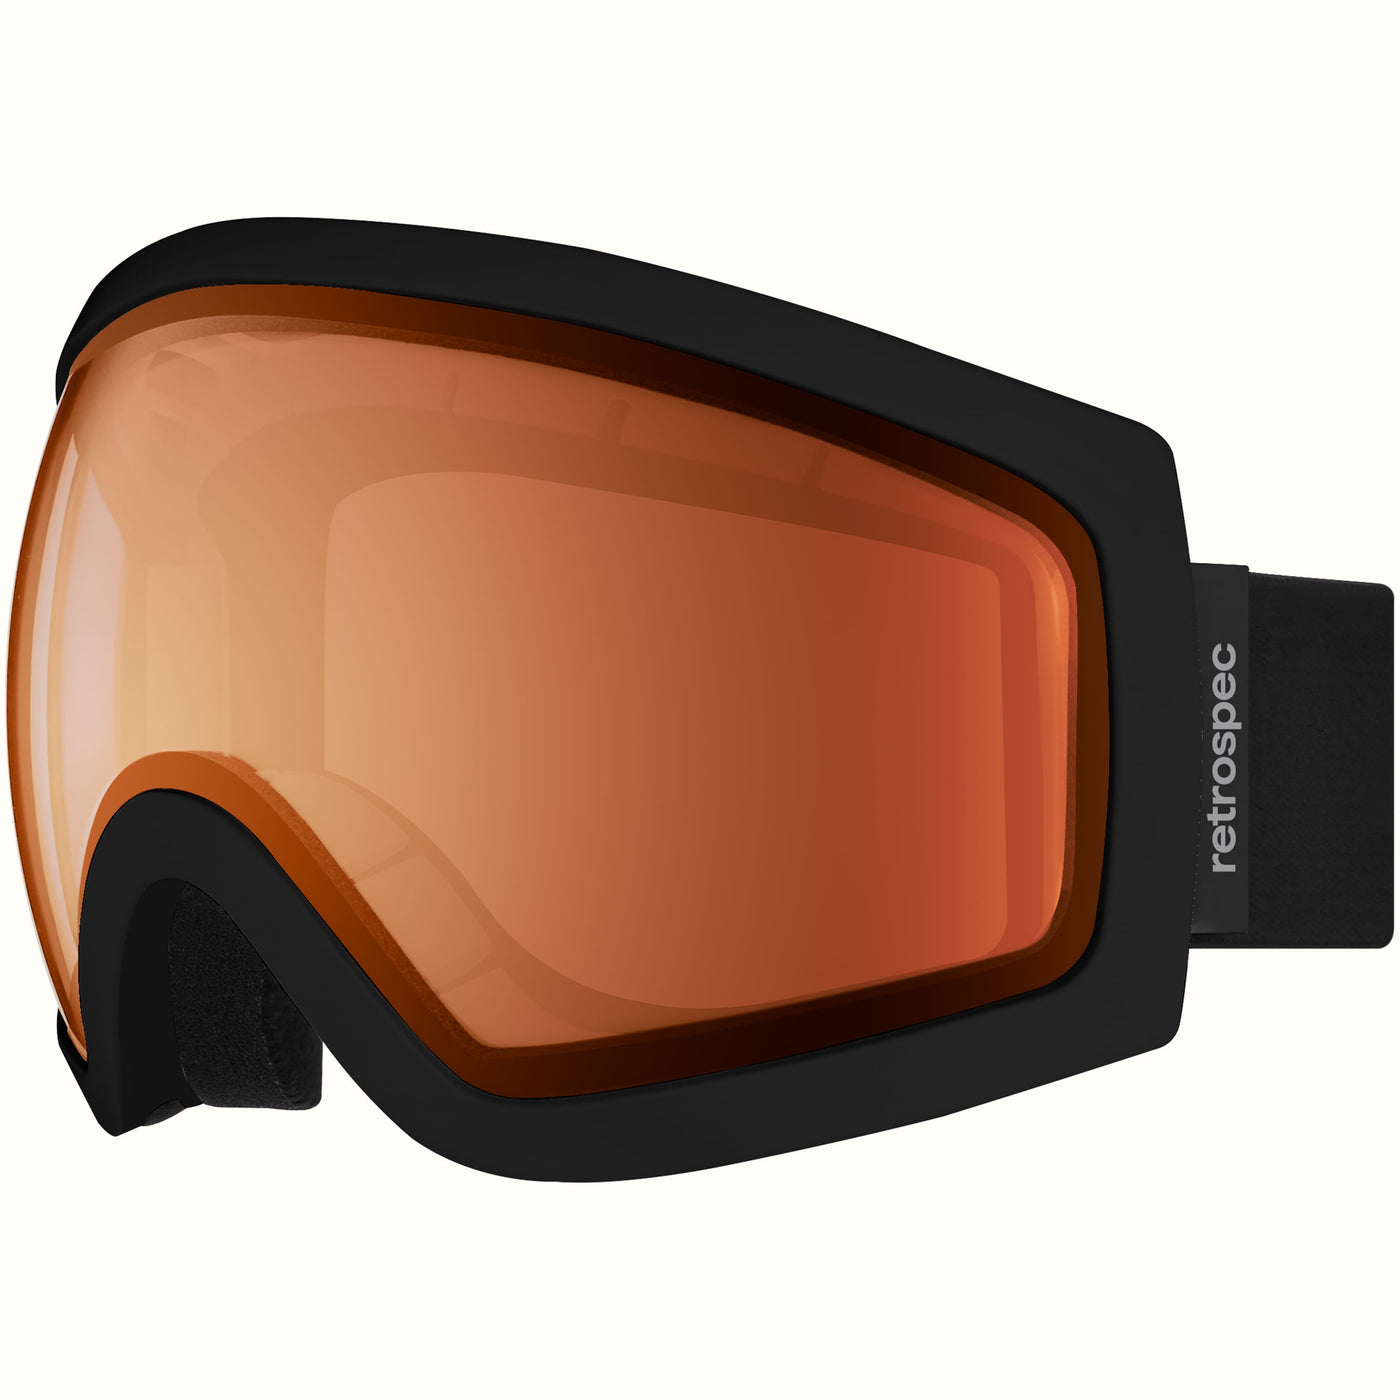 Phat! Magnetic Ski Snowboard Goggles For Men, Women & Youth, Uv Protection And Otg Design, Black Band